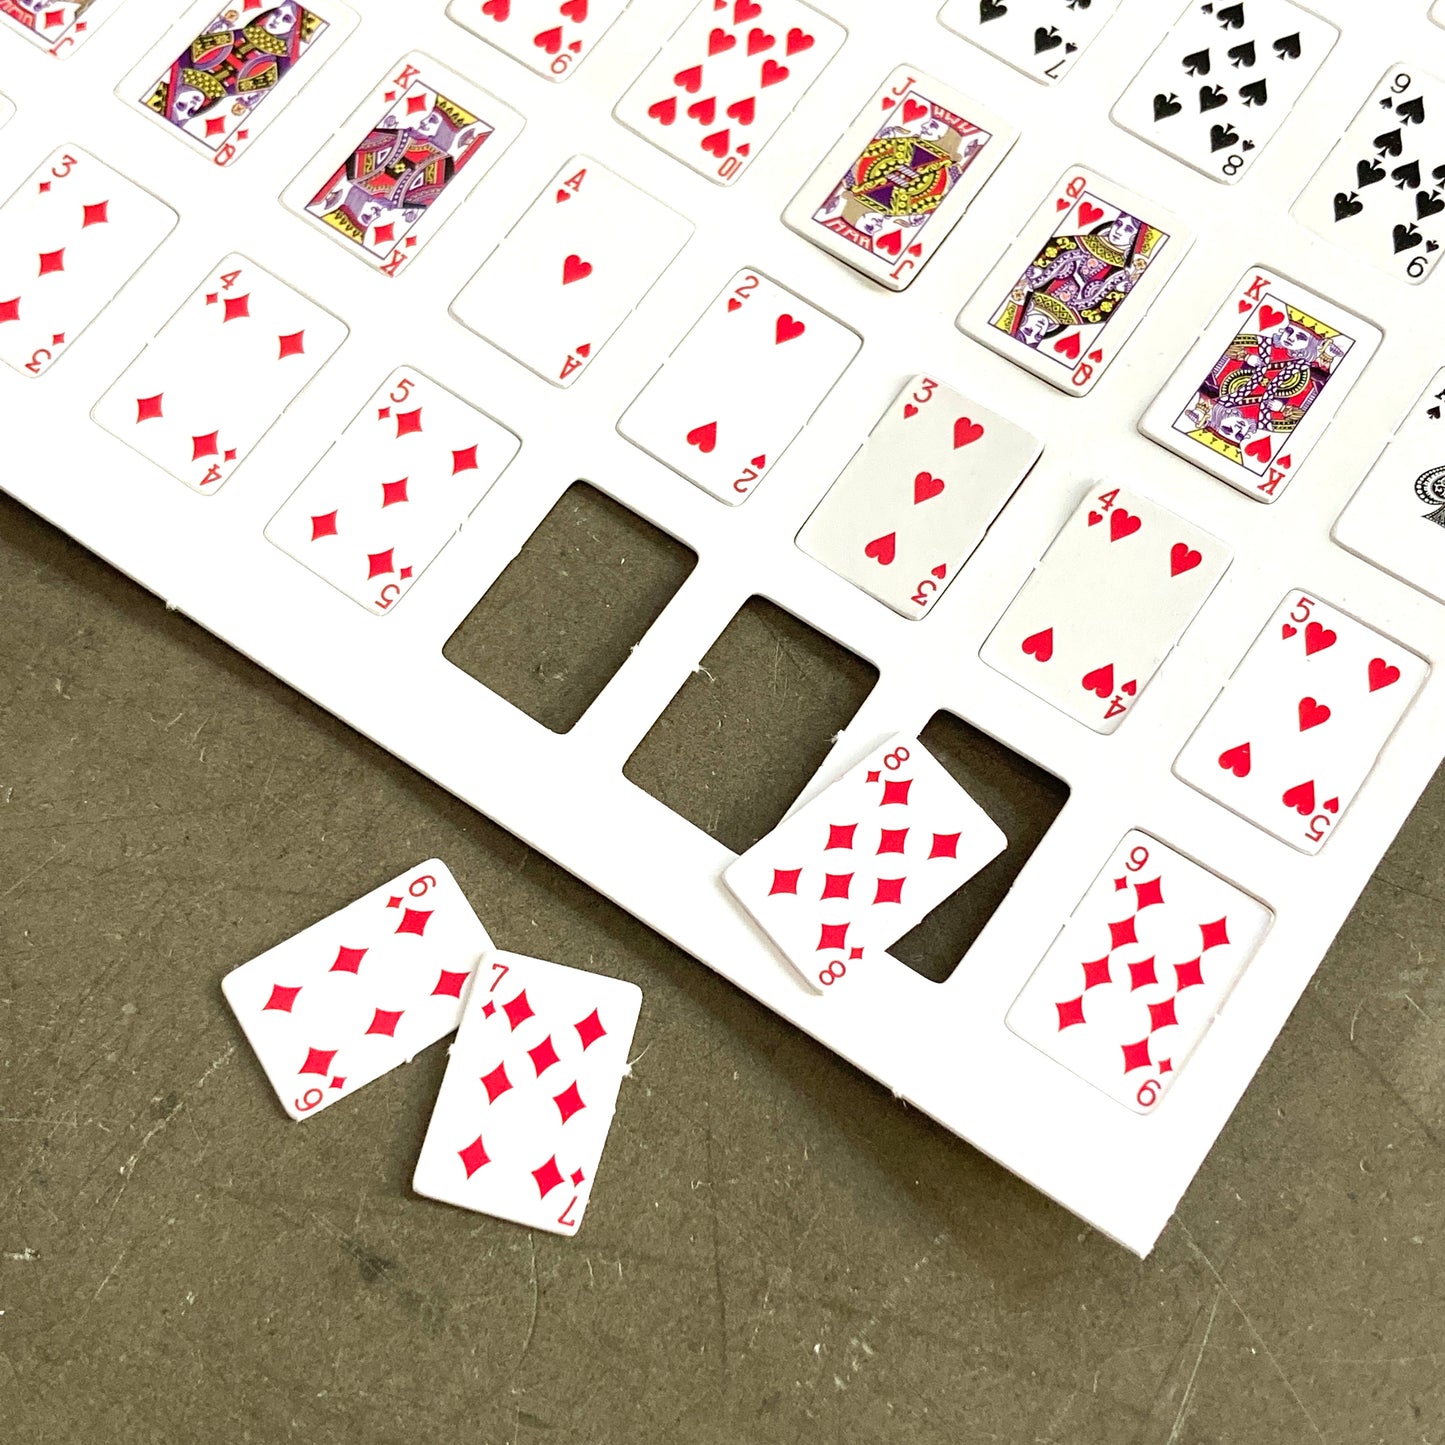 Miniature Deck Of Cards